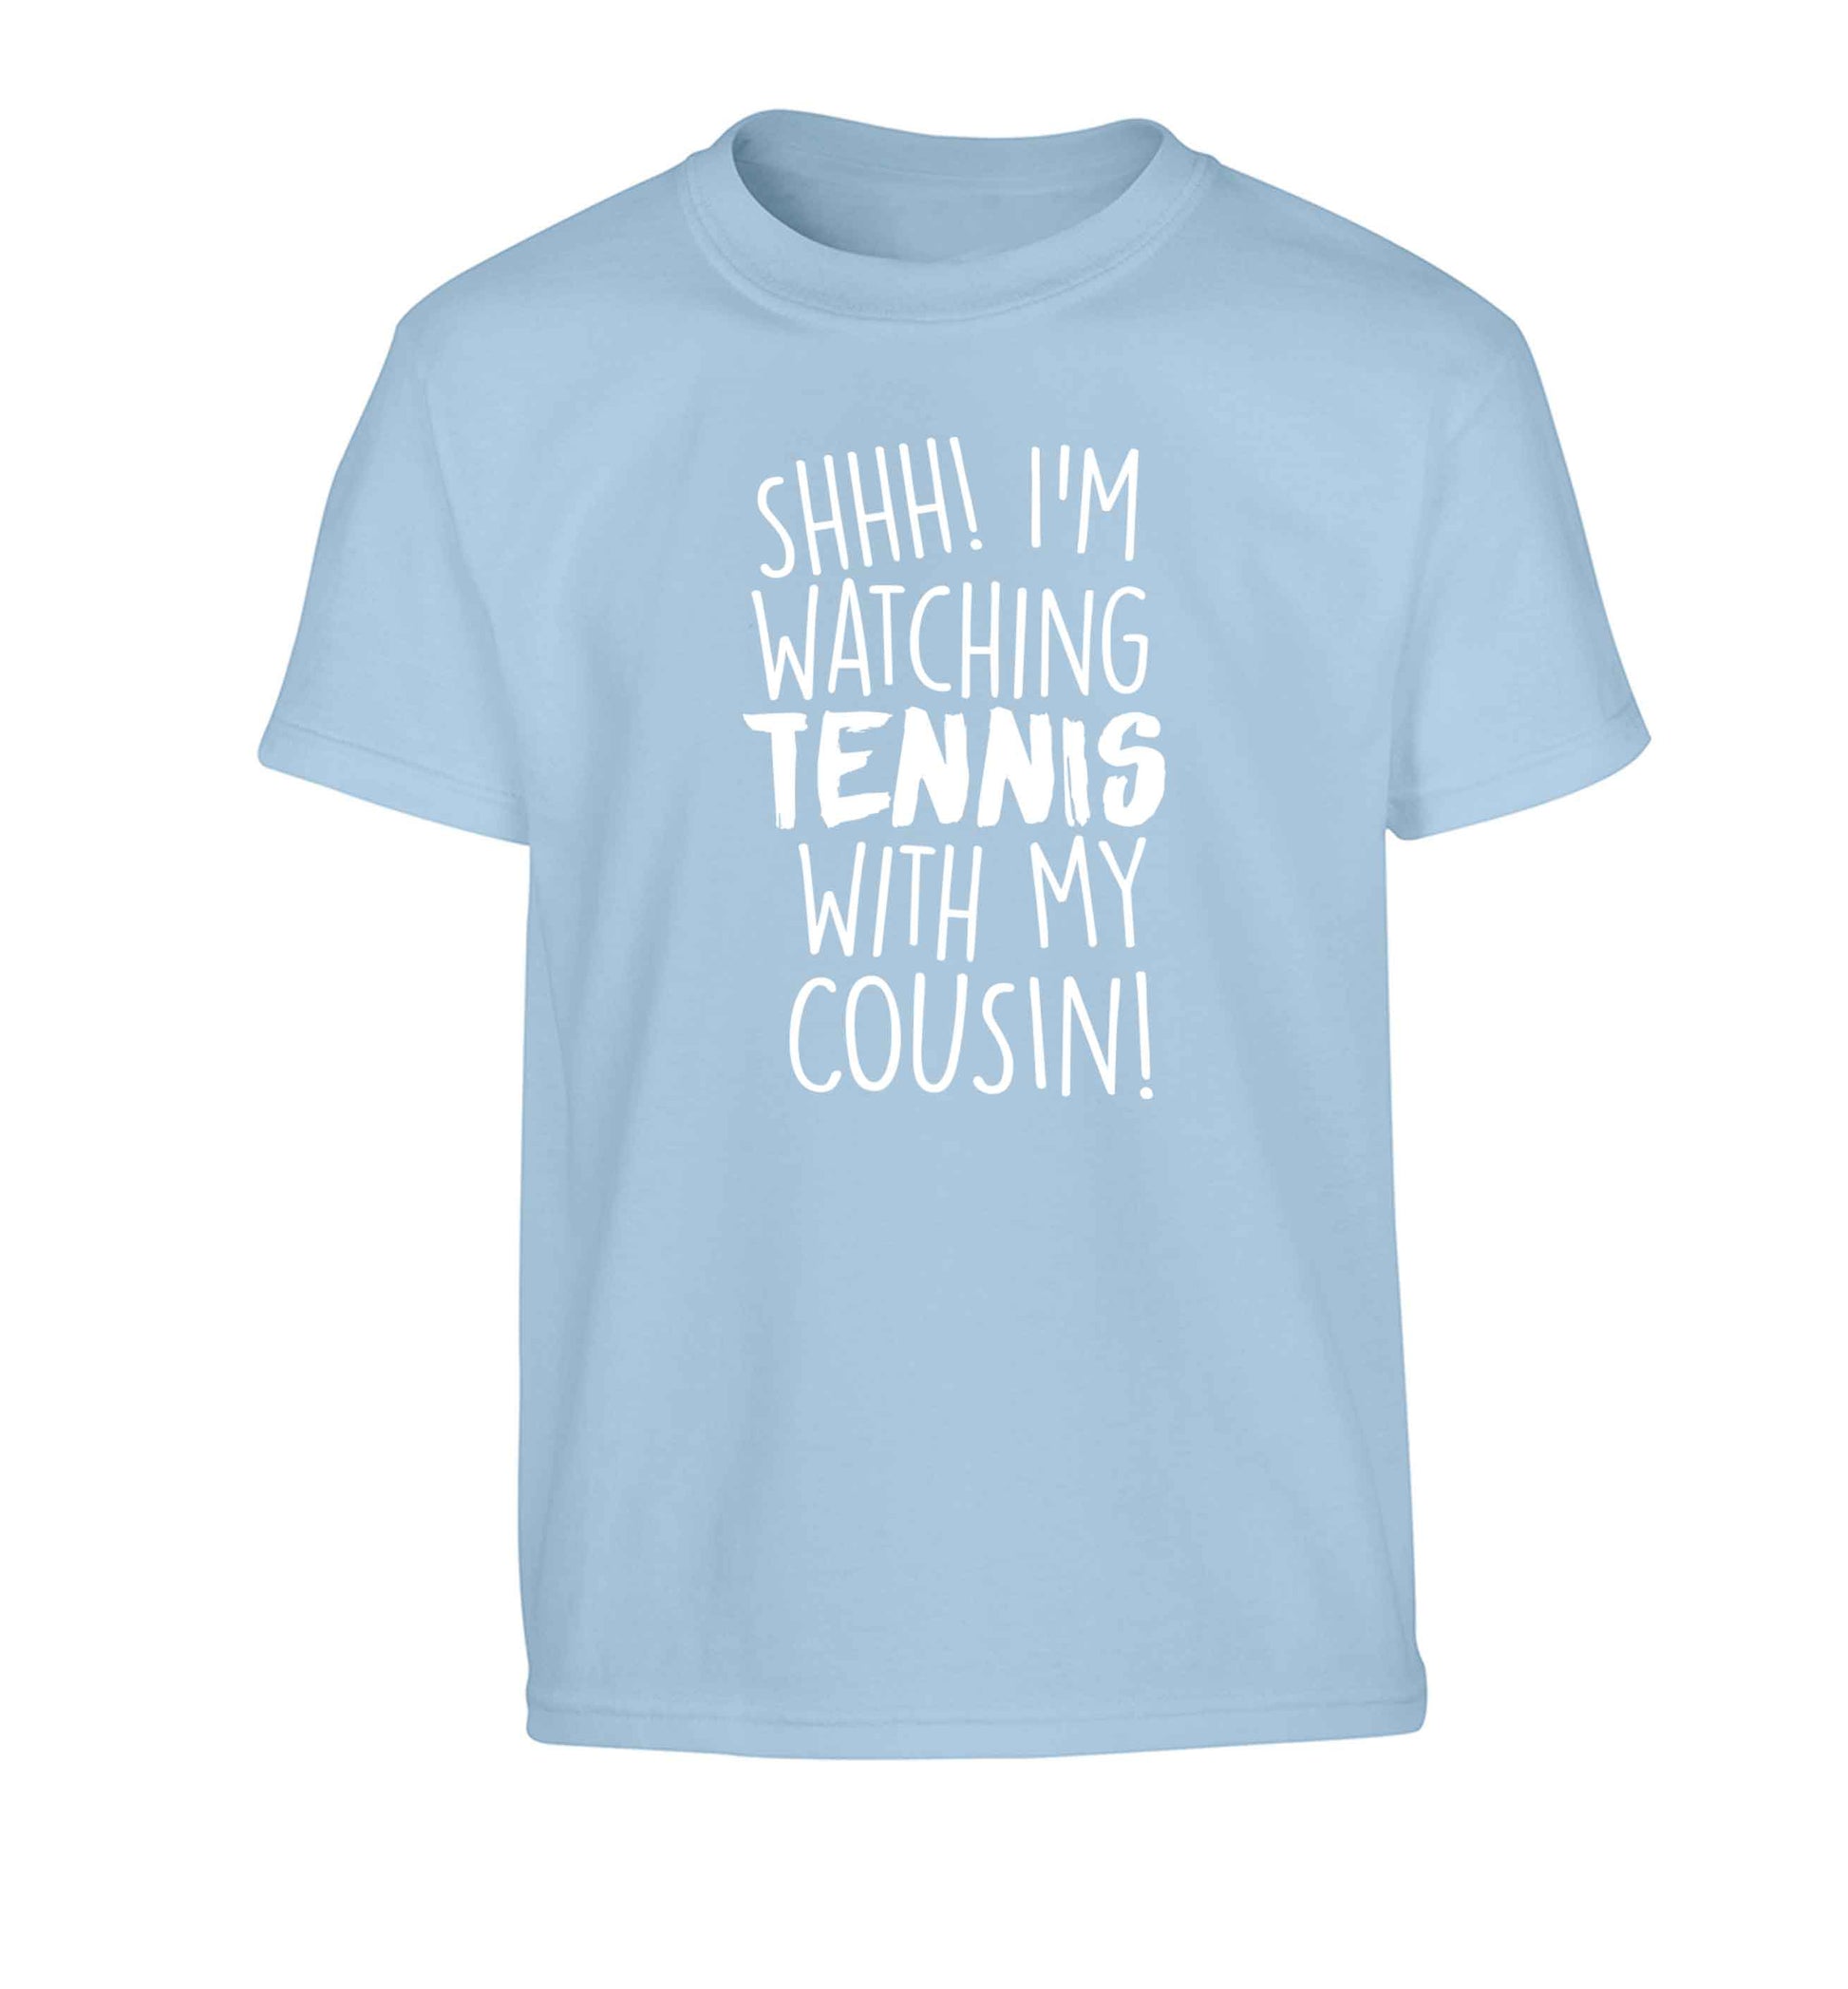 Shh! I'm watching tennis with my cousin! Children's light blue Tshirt 12-13 Years